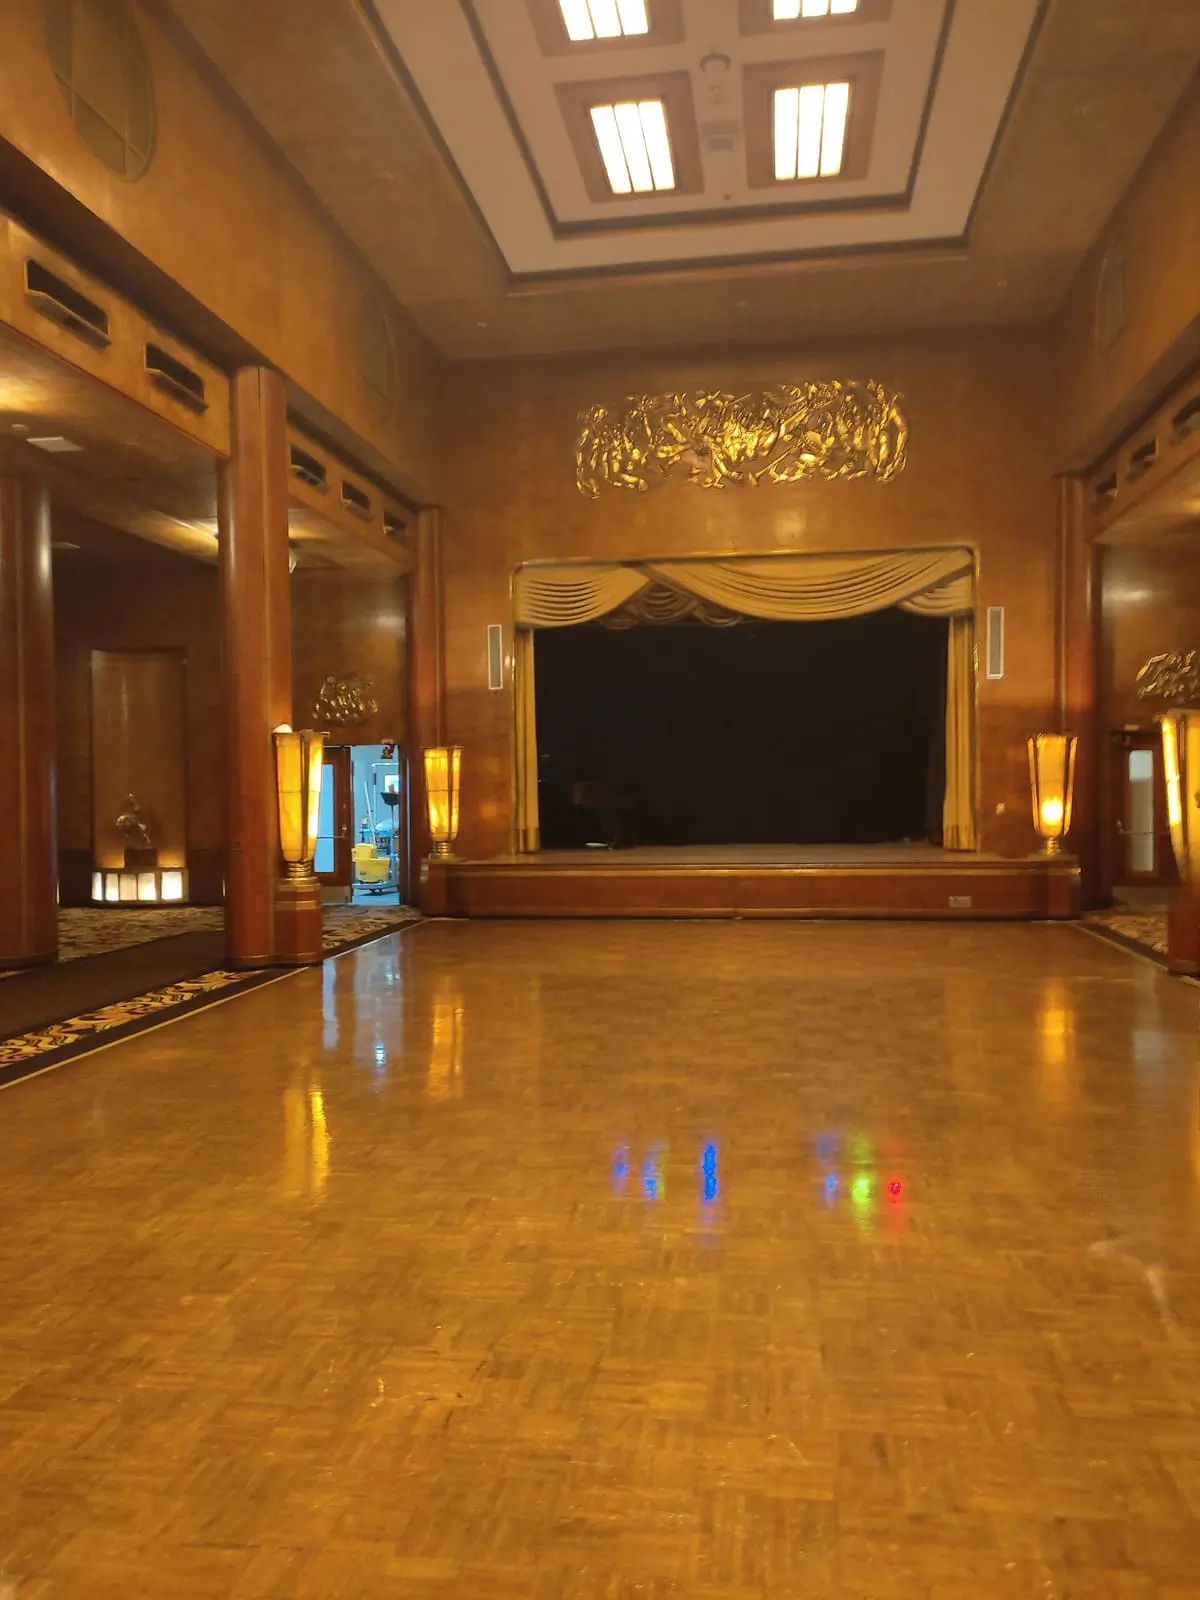 Beautifully decorated Queen's room with dance floor in the middle and stage at the end